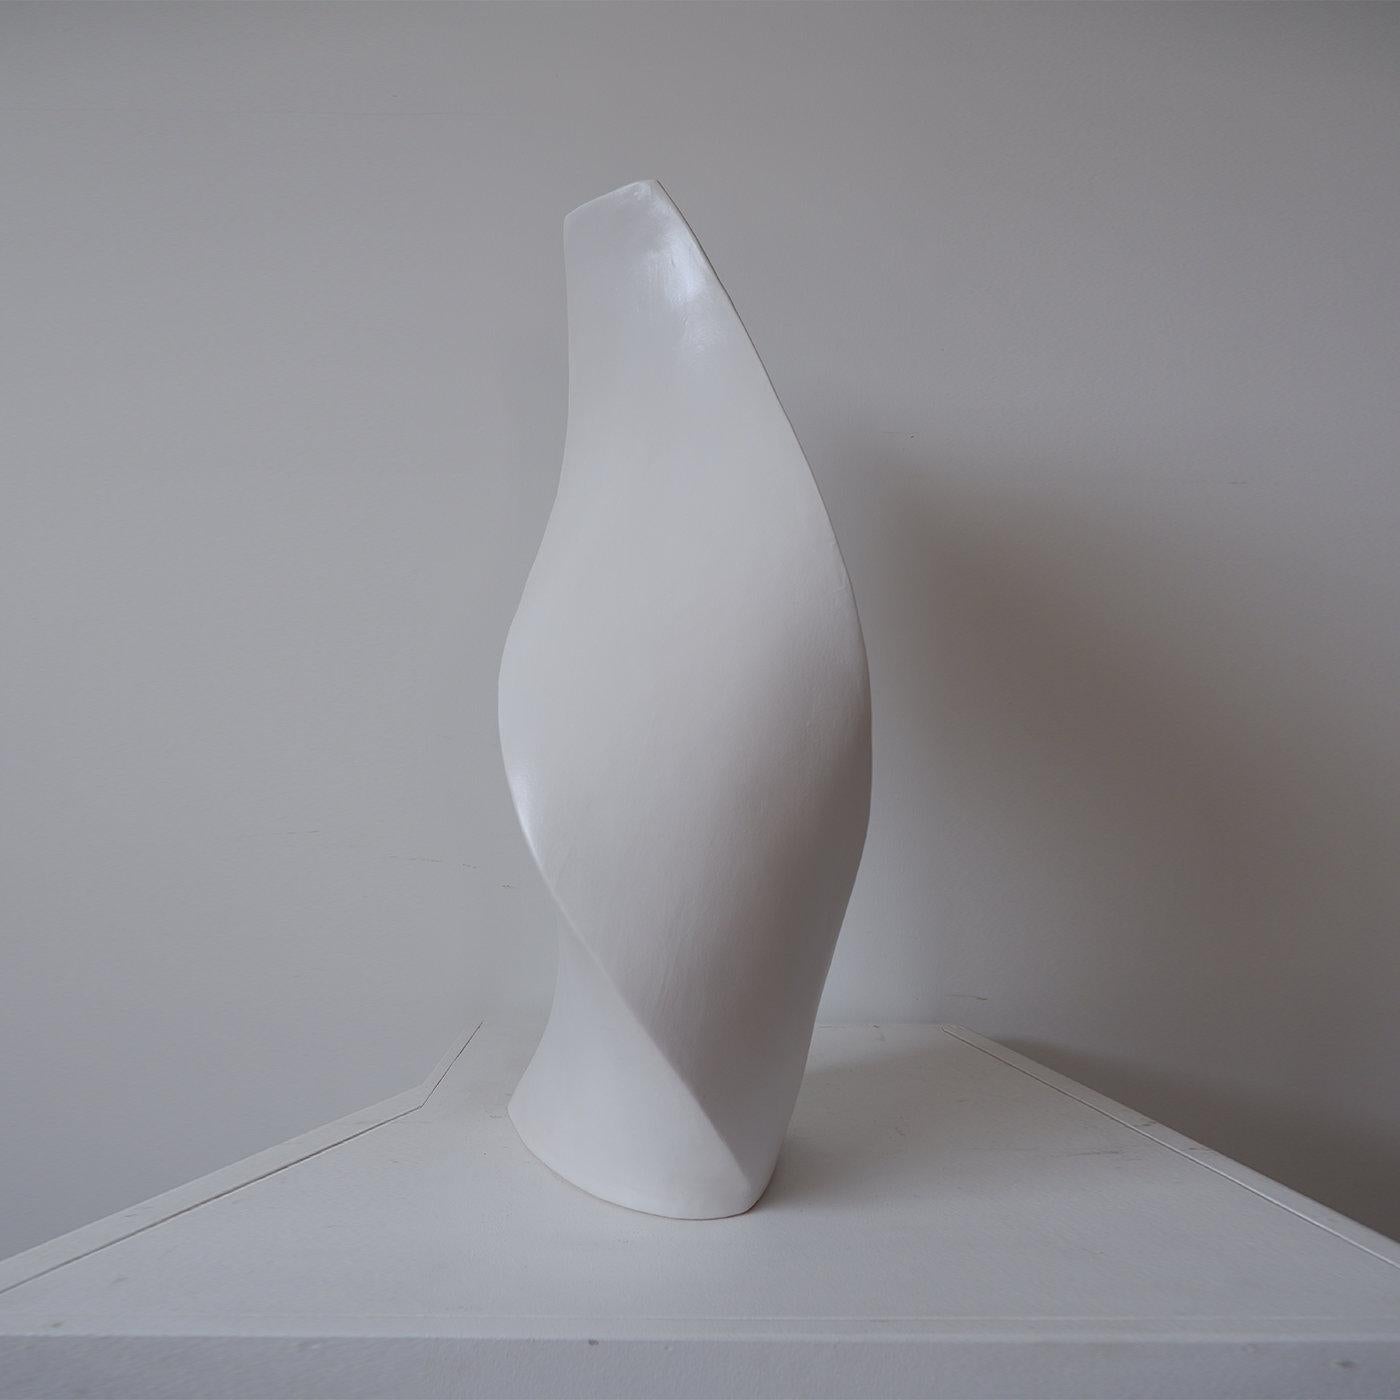 Demeter was the Greek goddess of fertility, the four seasons and the cycle of life. This sleek, white vase features a sinuous silhouette that is the perfect minimalist backdrop for any floral arrangement. The vase becomes a watery womb, holding the